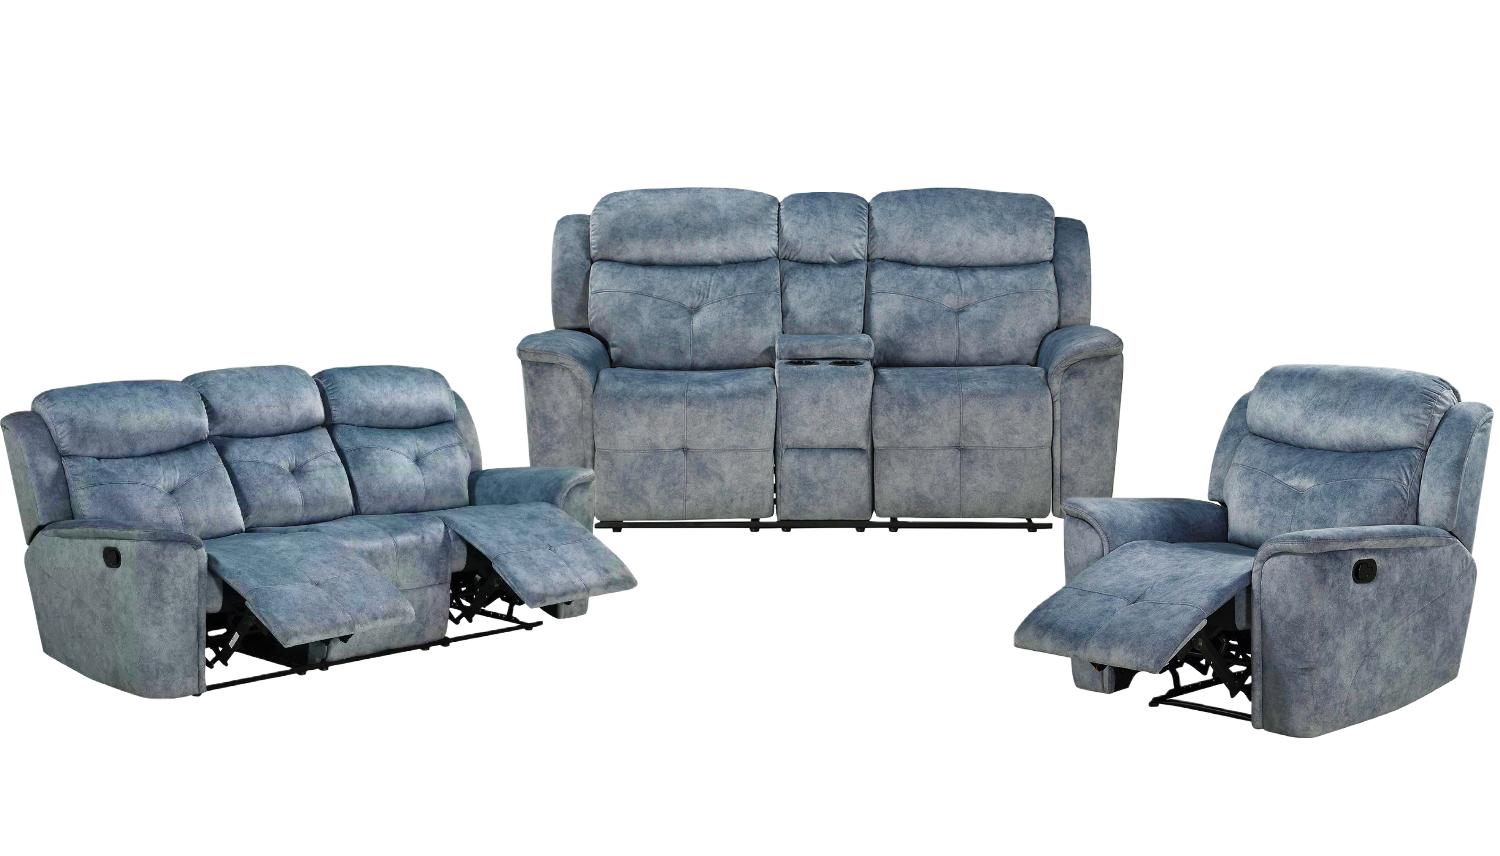 Modern Sofa Loveseat and Chair Set Mariana 55035-3pcs in Blue Fabric